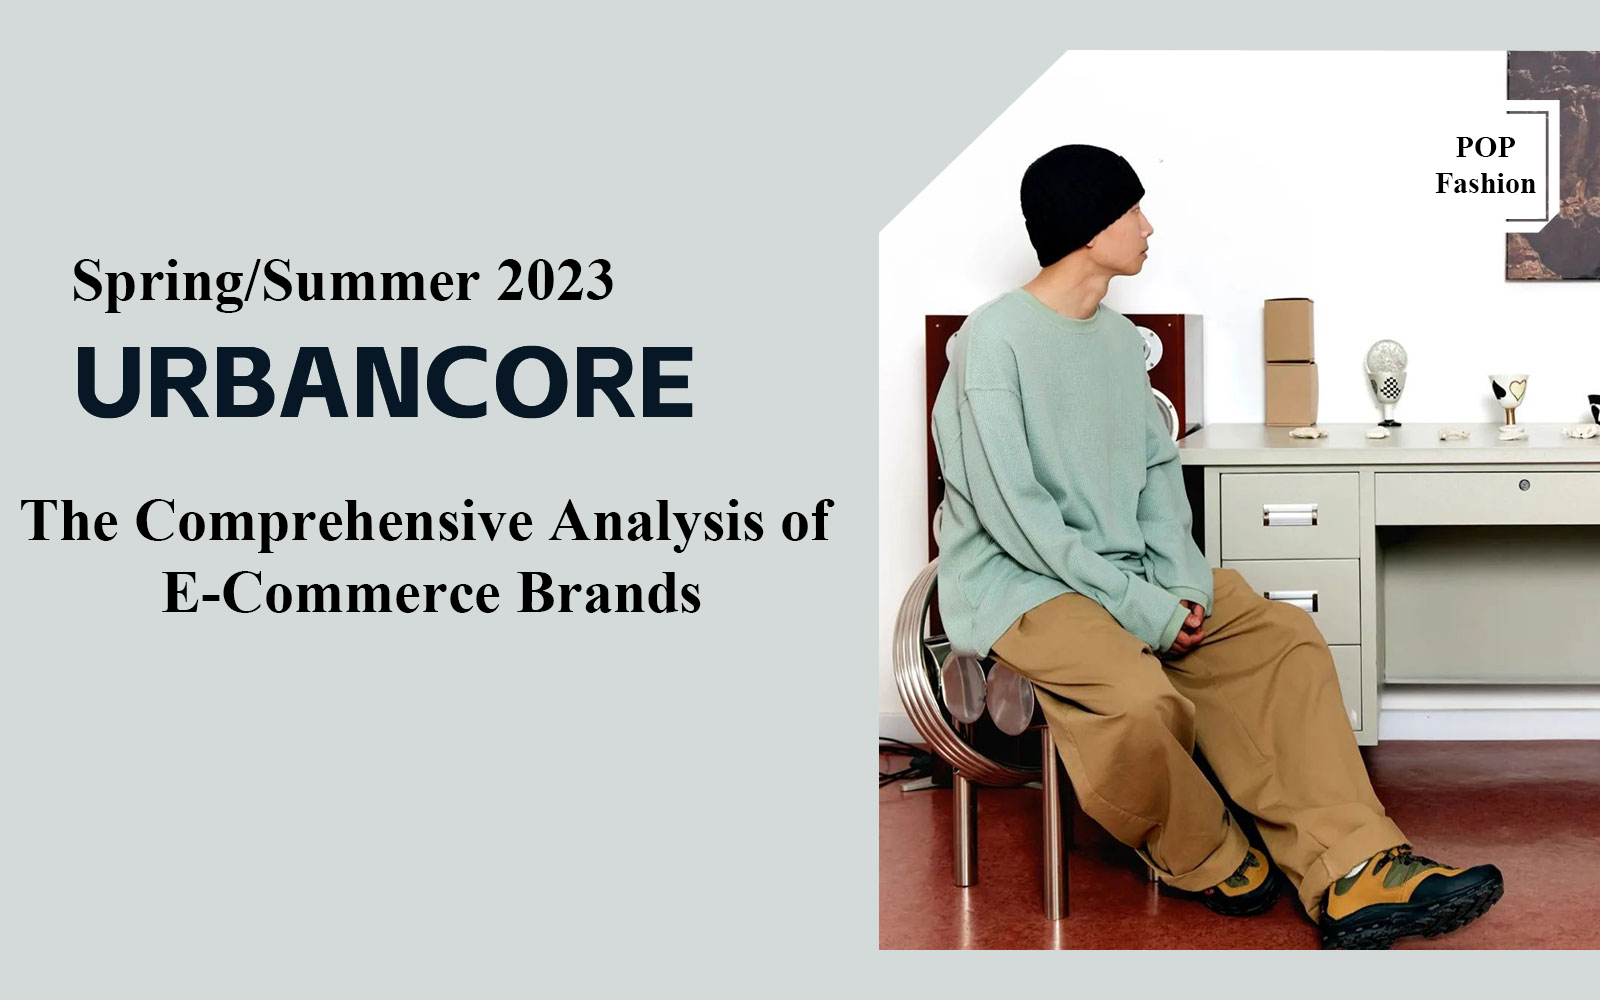 Urbancore -- The Comprehensive Analysis of E-Commerce Brands